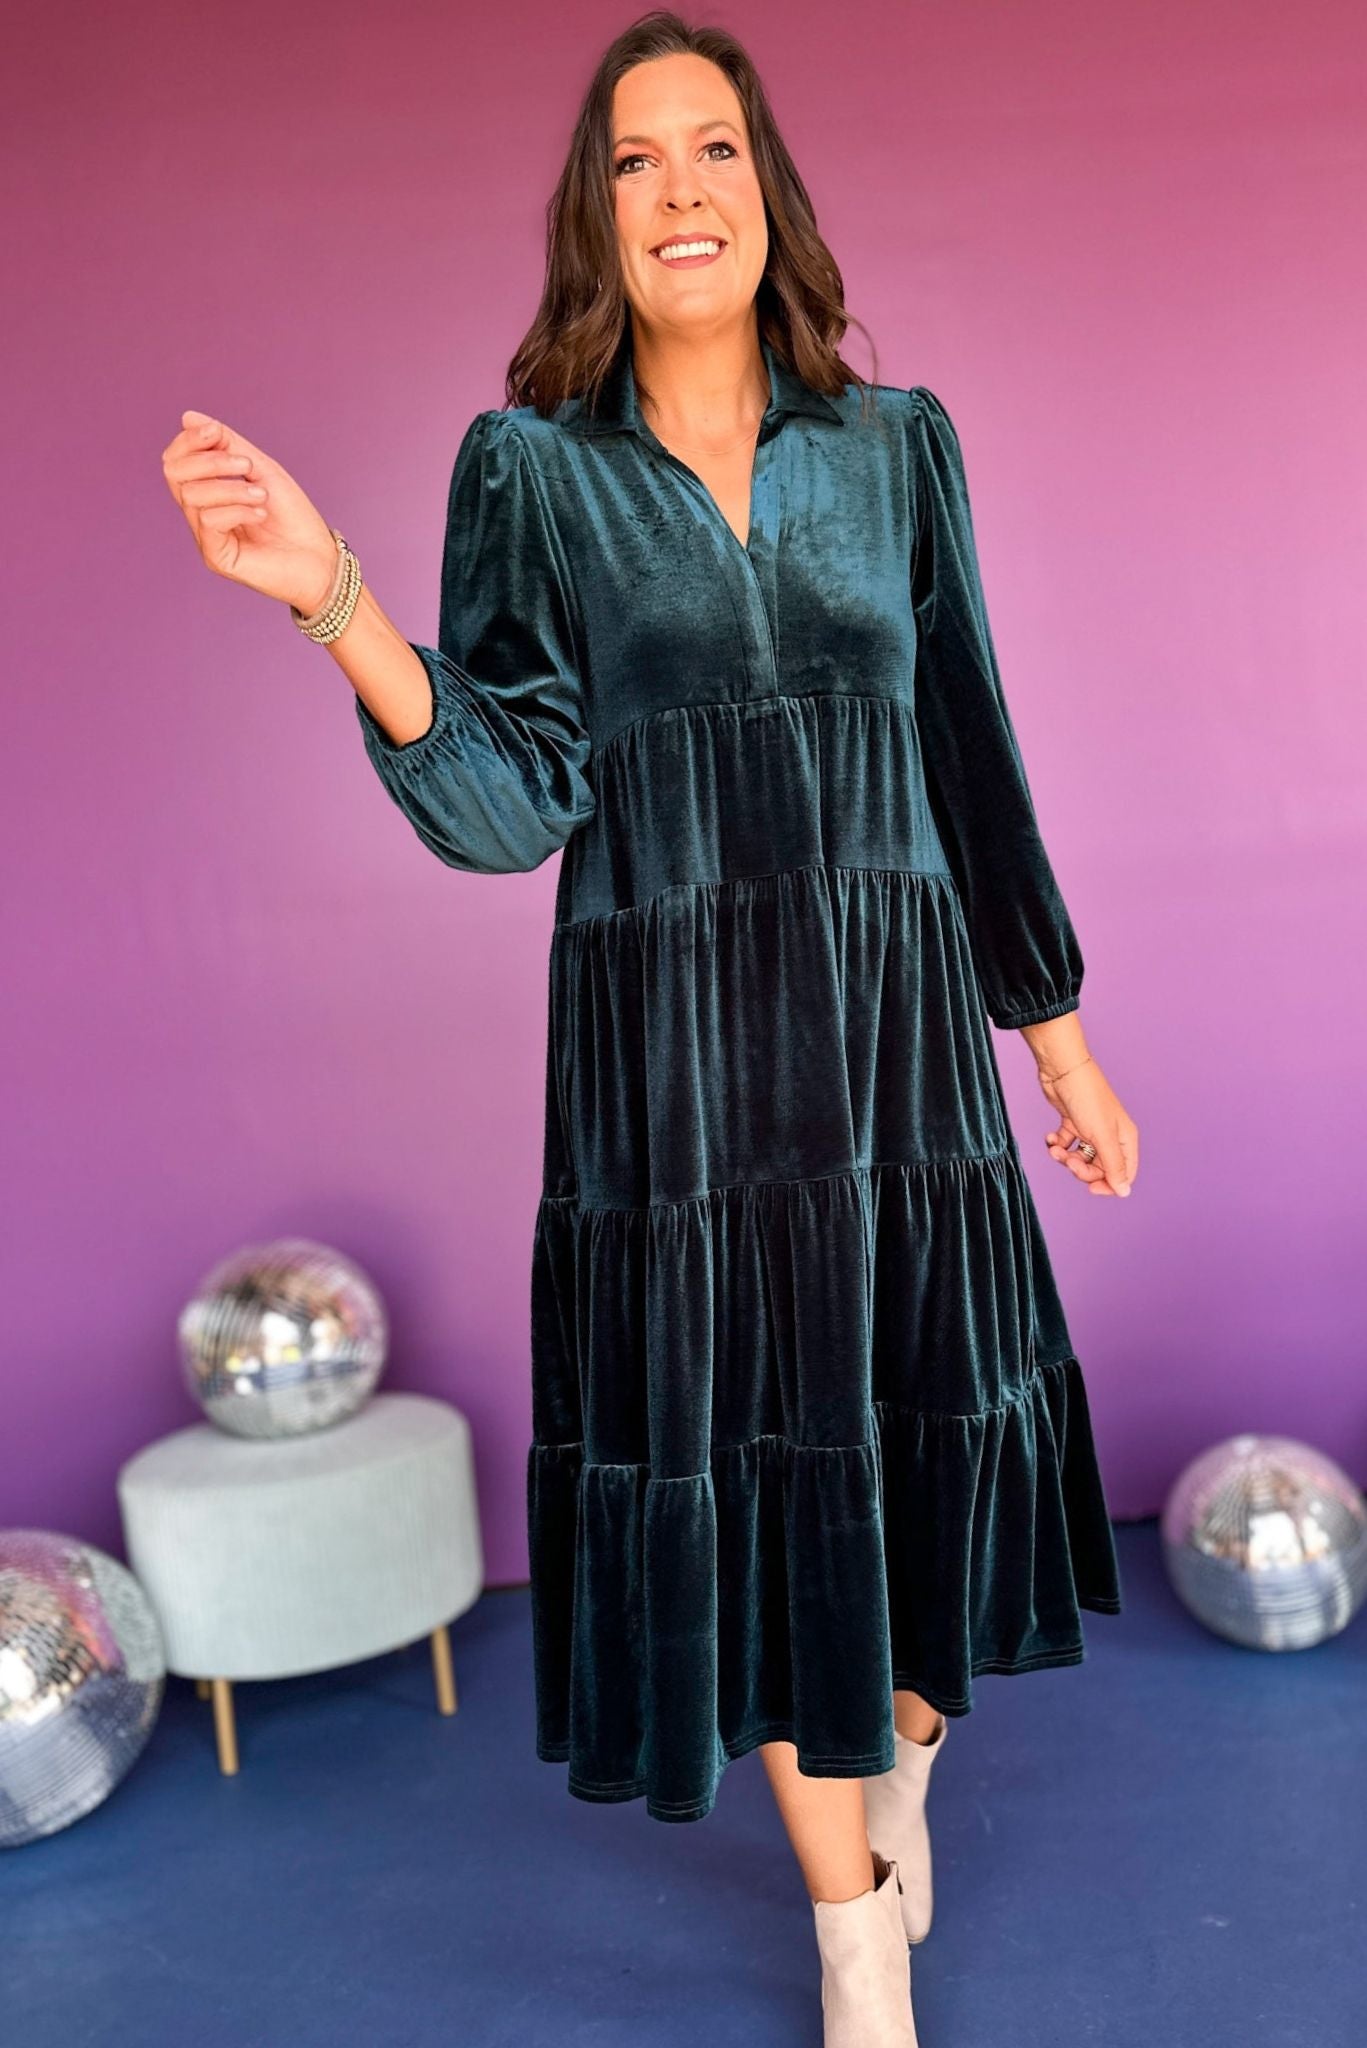 SSYS The Lillian Dress In Hunter Velvet, SSYS the label, ssys dress, must have dress, must have print, must have style, elevated style, elevated dress, mom style, shop style your senses by mallory fitzsimmons